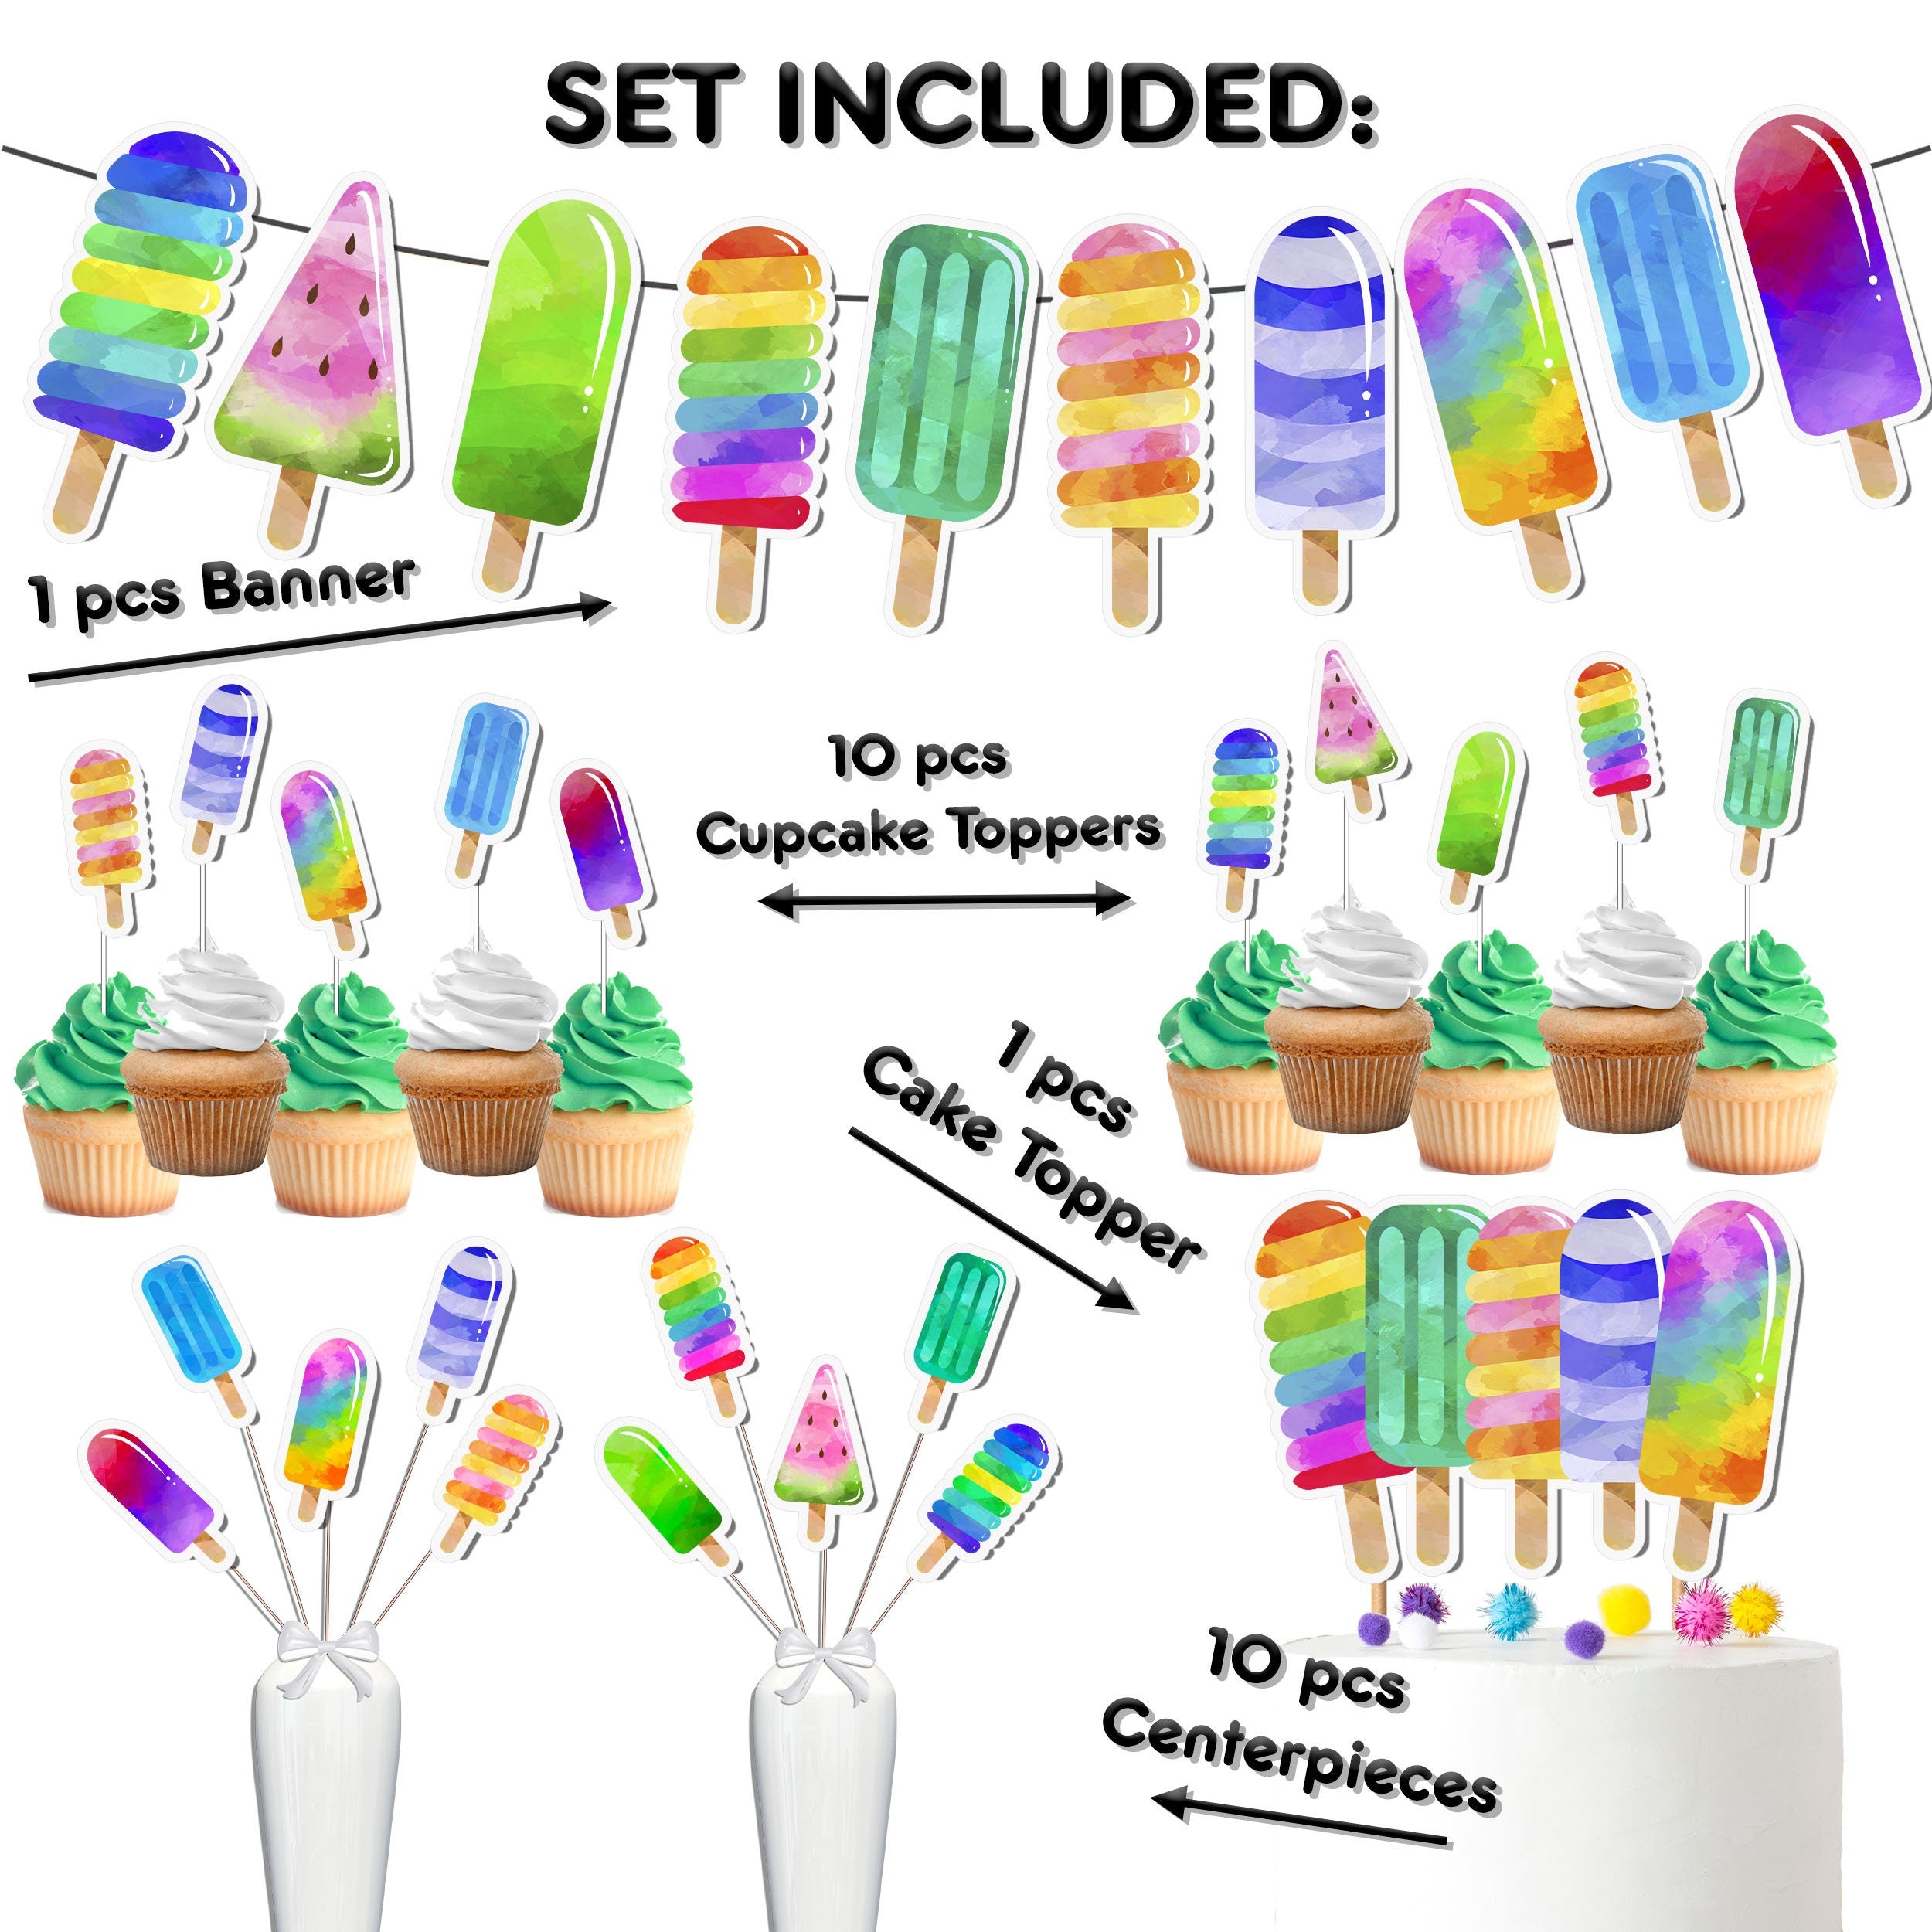 Colorful Ice Cream Party Decor Set - Vibrant Cake Topper, Cupcake Toppers, Centerpieces & Banner - Scoop Up Fun for a Sweet Birthday Bash